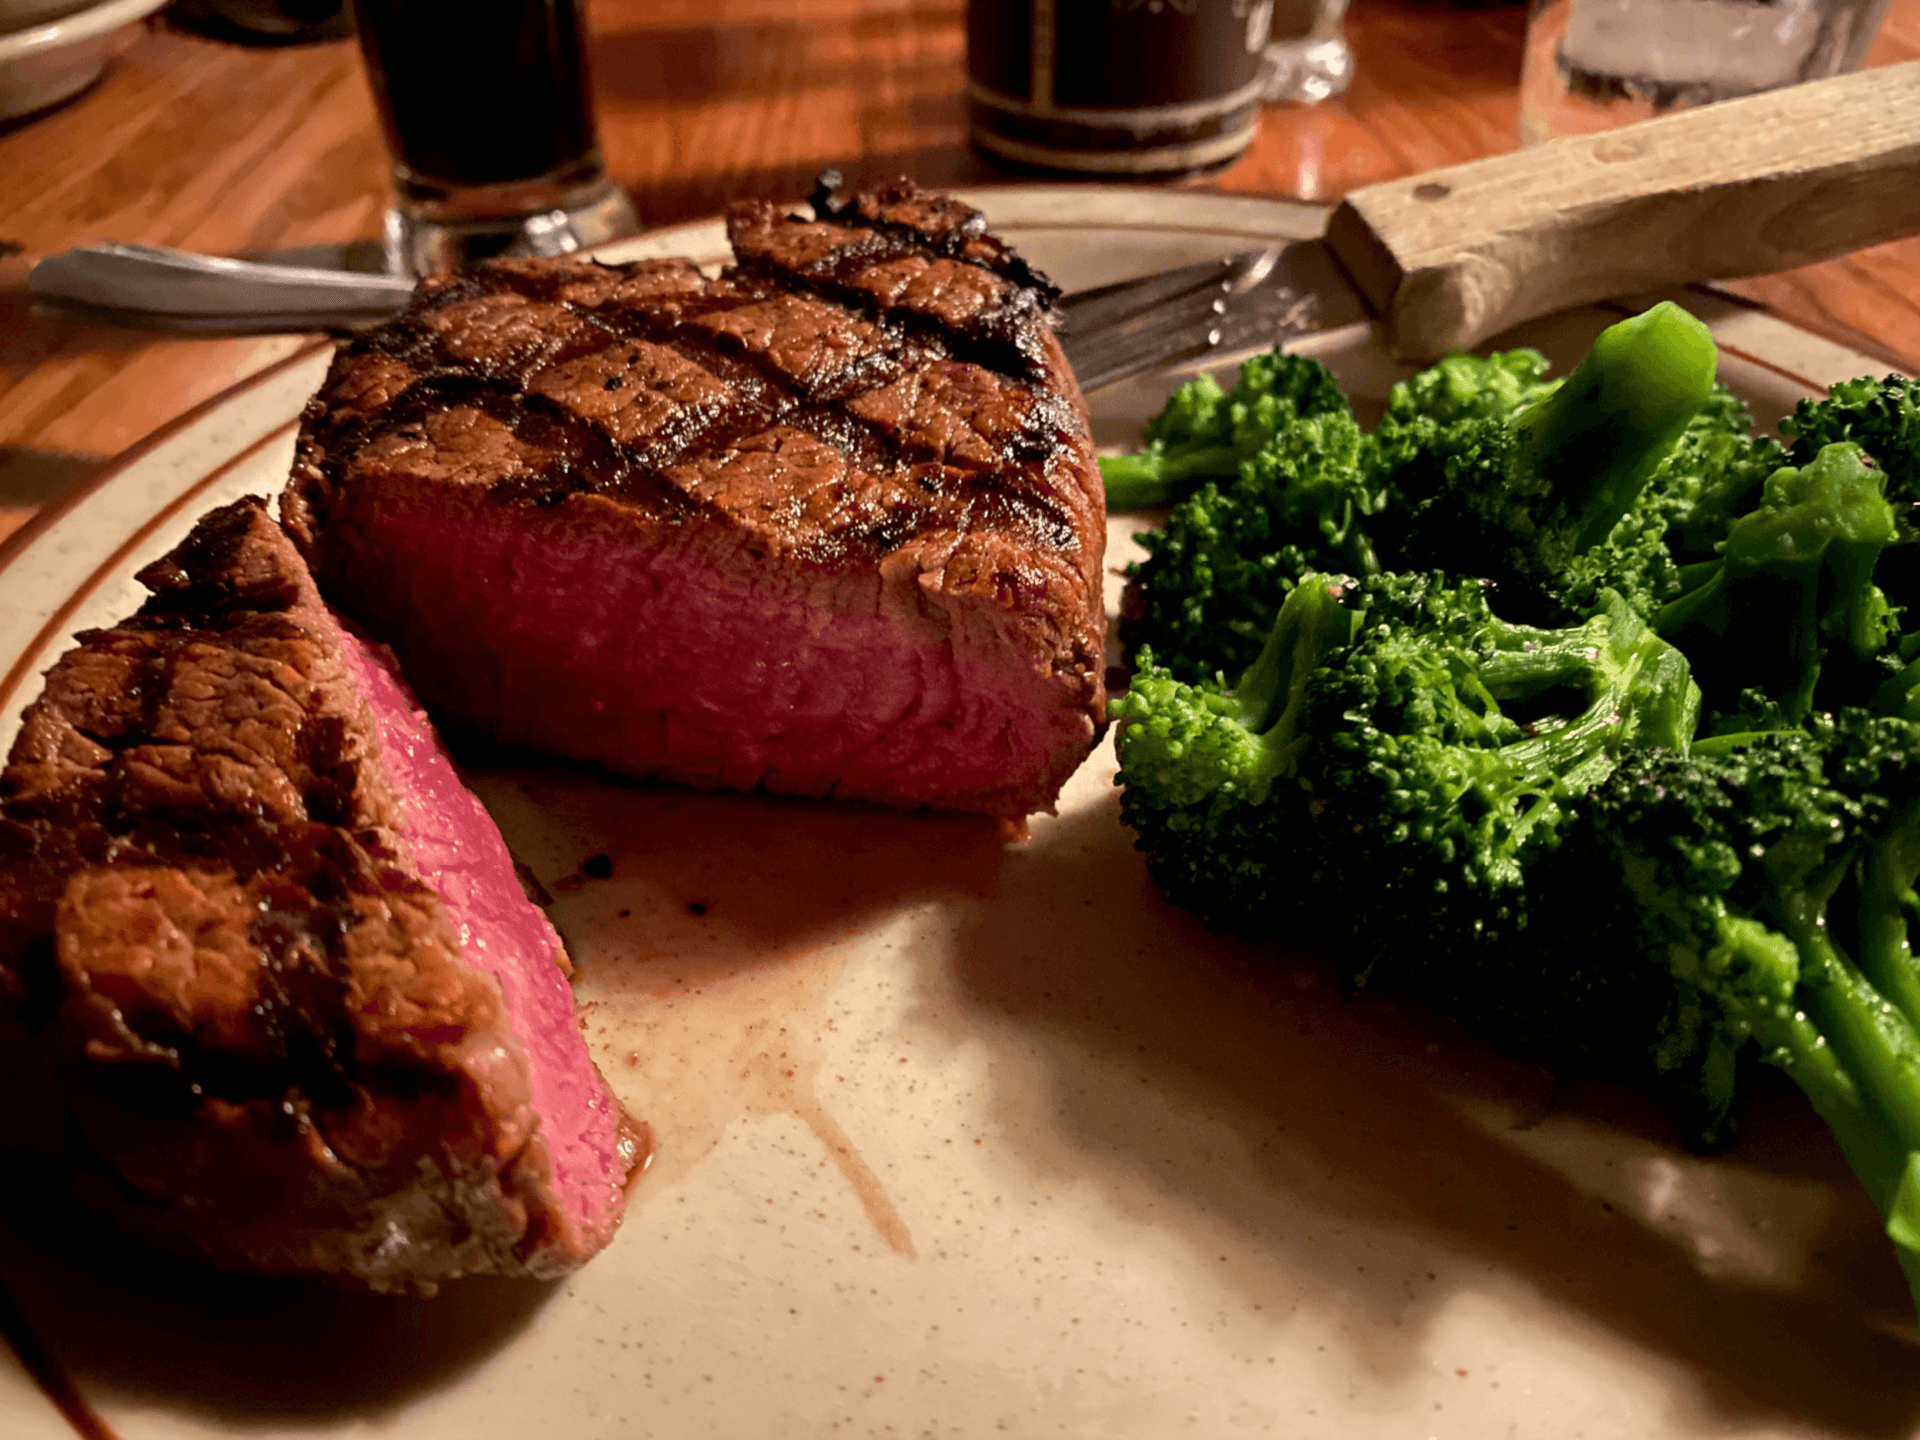 12 ounce whiskey marinated filet with broccoli at The Drover Steakhouse in Omaha